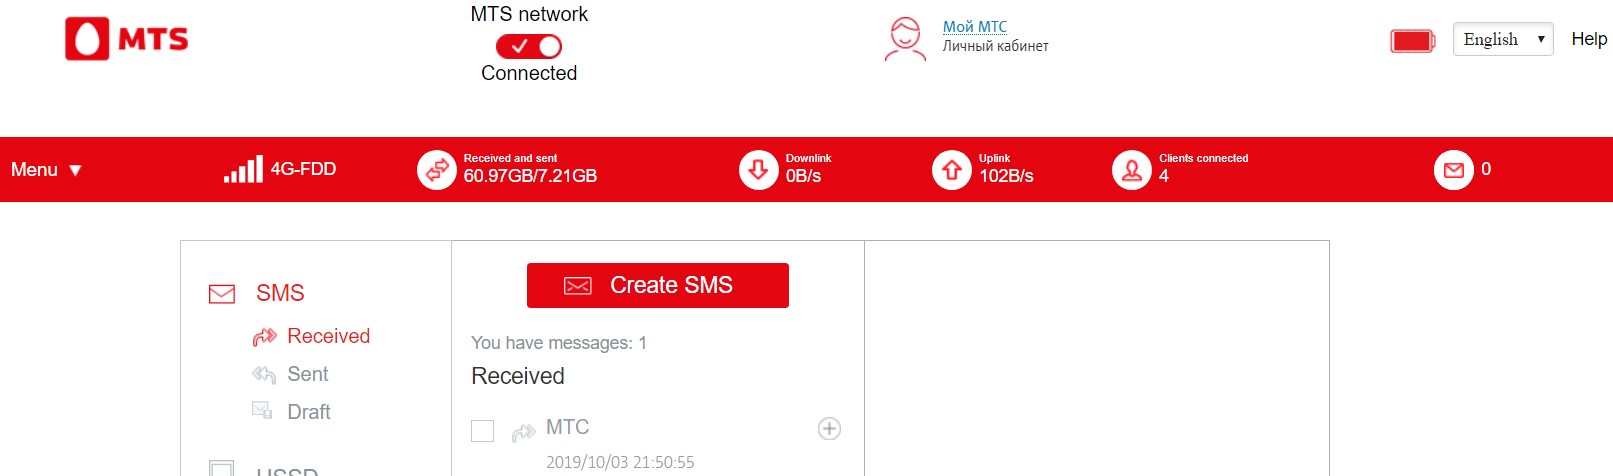 MTS 4G Wi-Fi router 874FT SMS UI